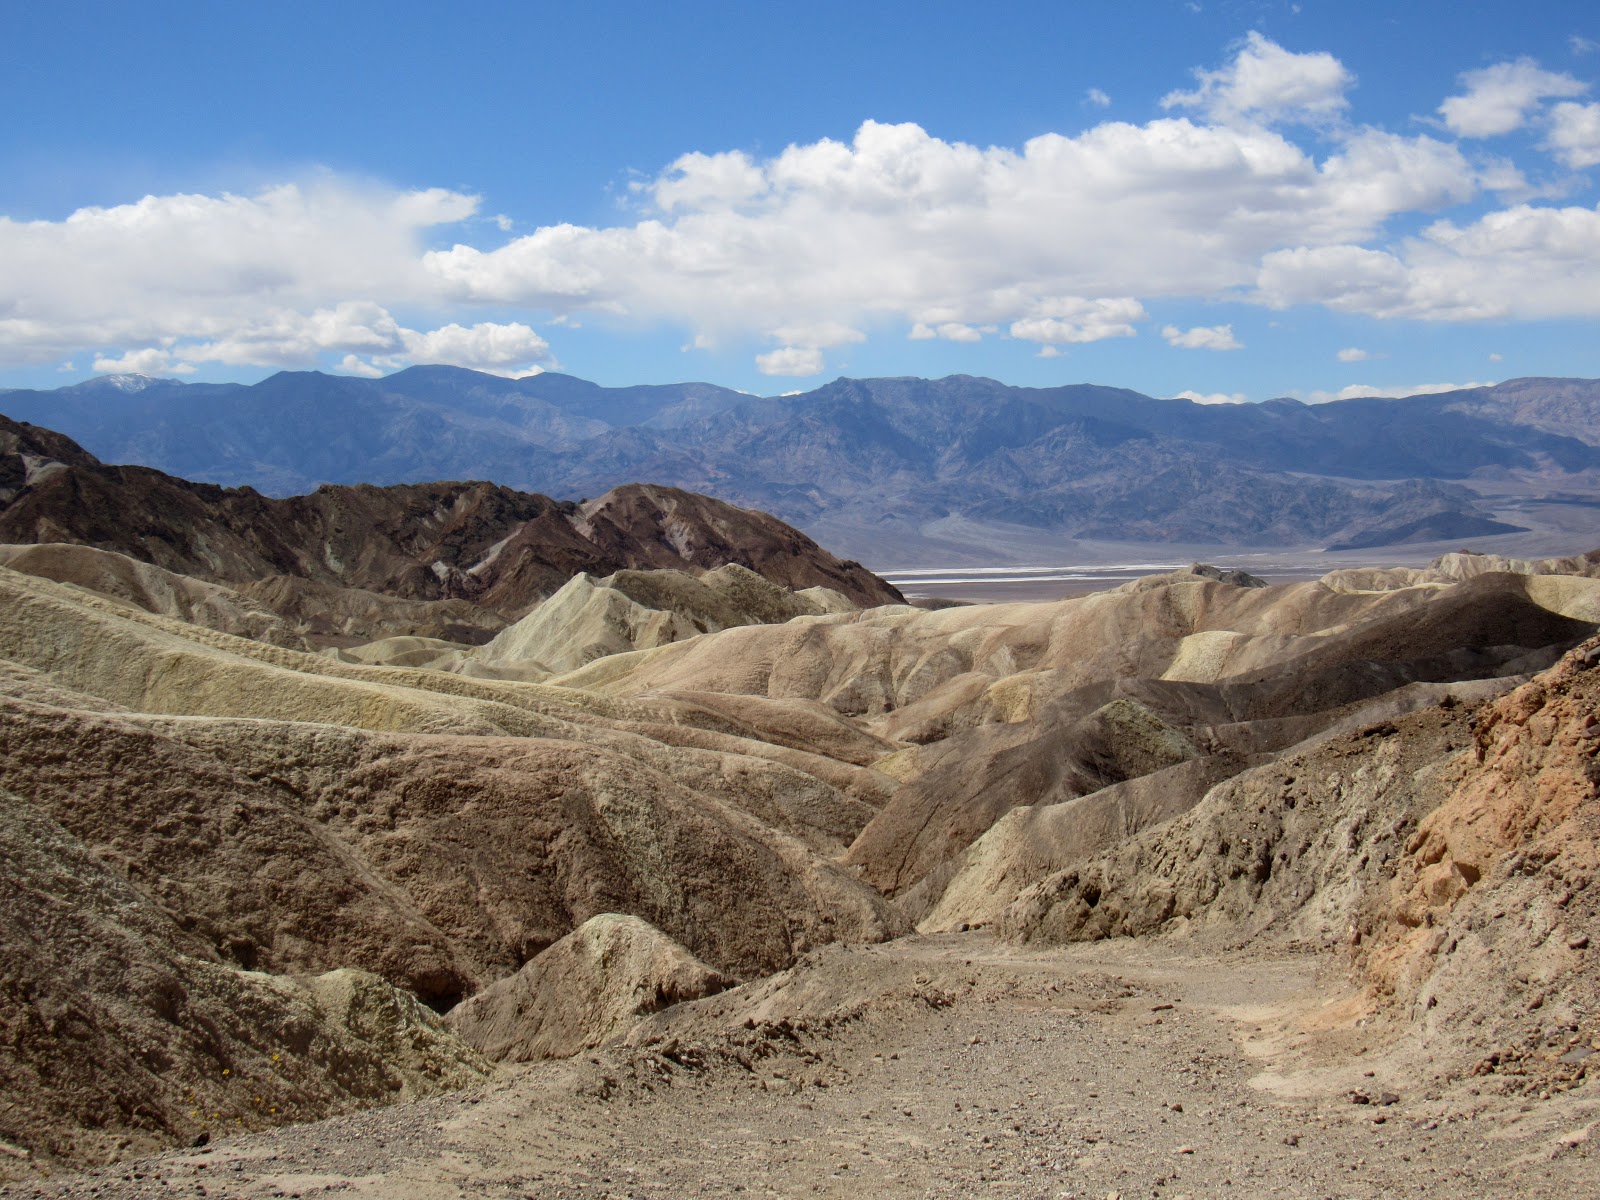 Hiking Trails: Gower Gulch and Golden Canyon, Death Valley National Park